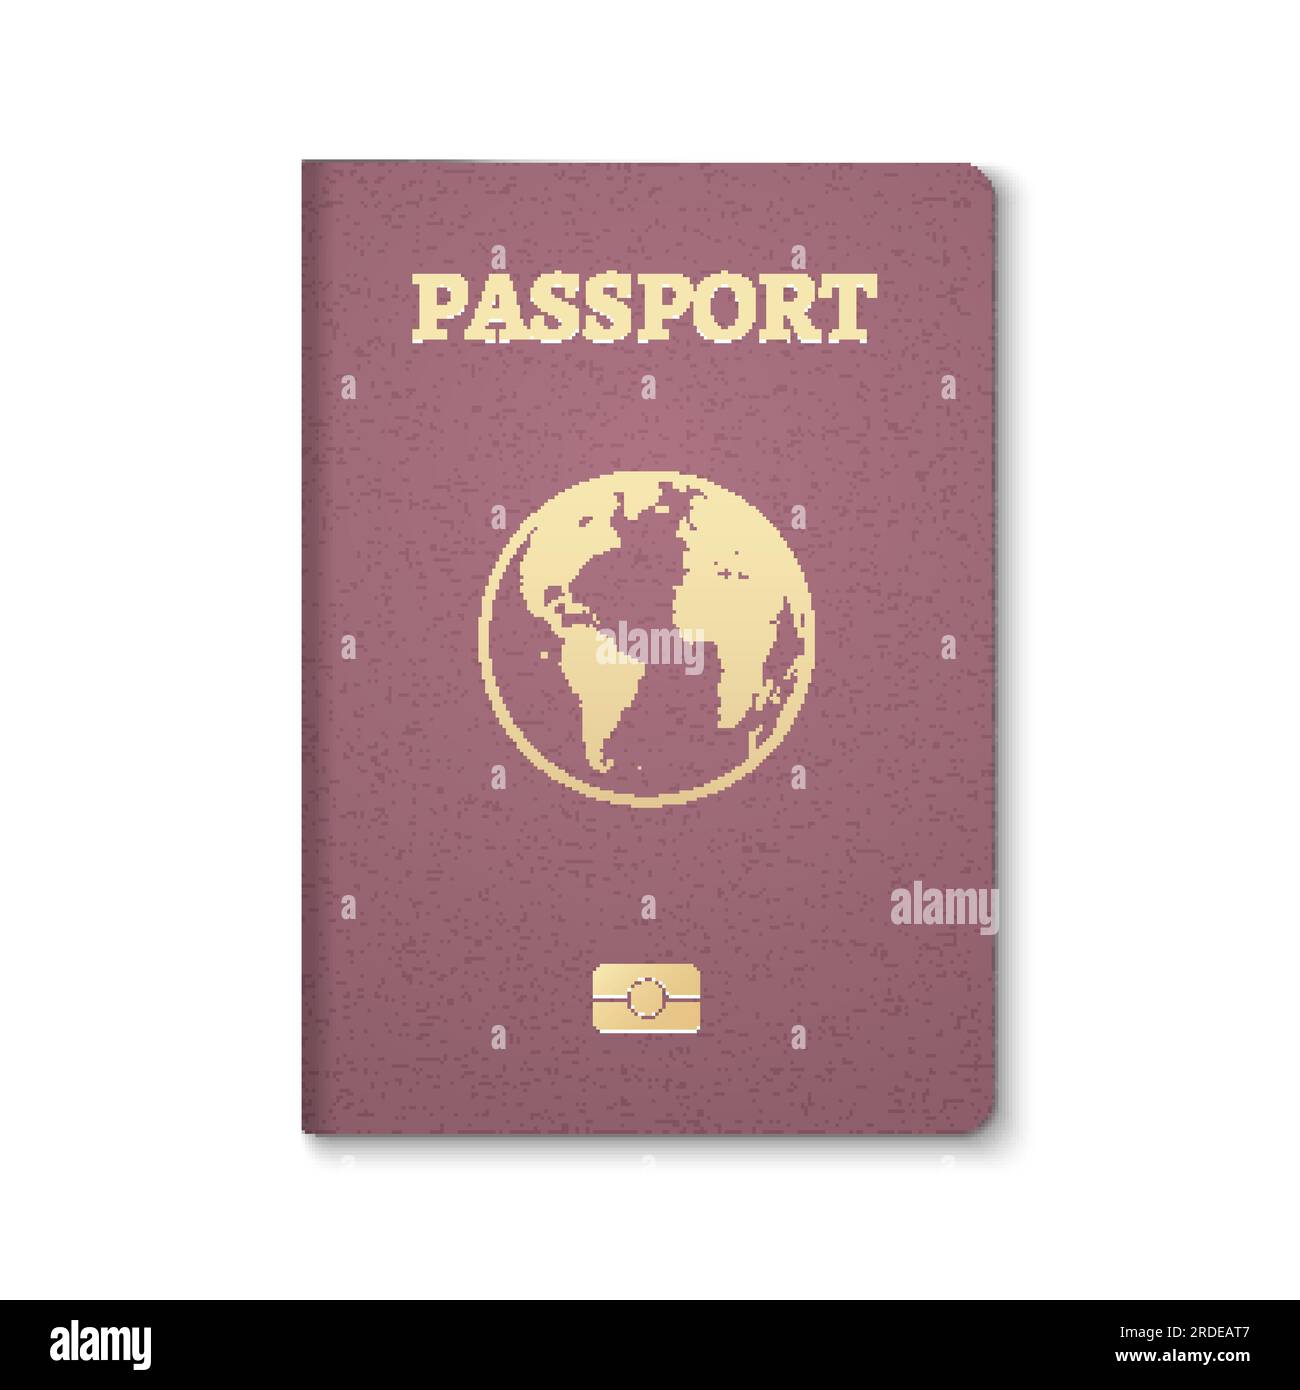 Passport with world map globe on brown cover. Biometric